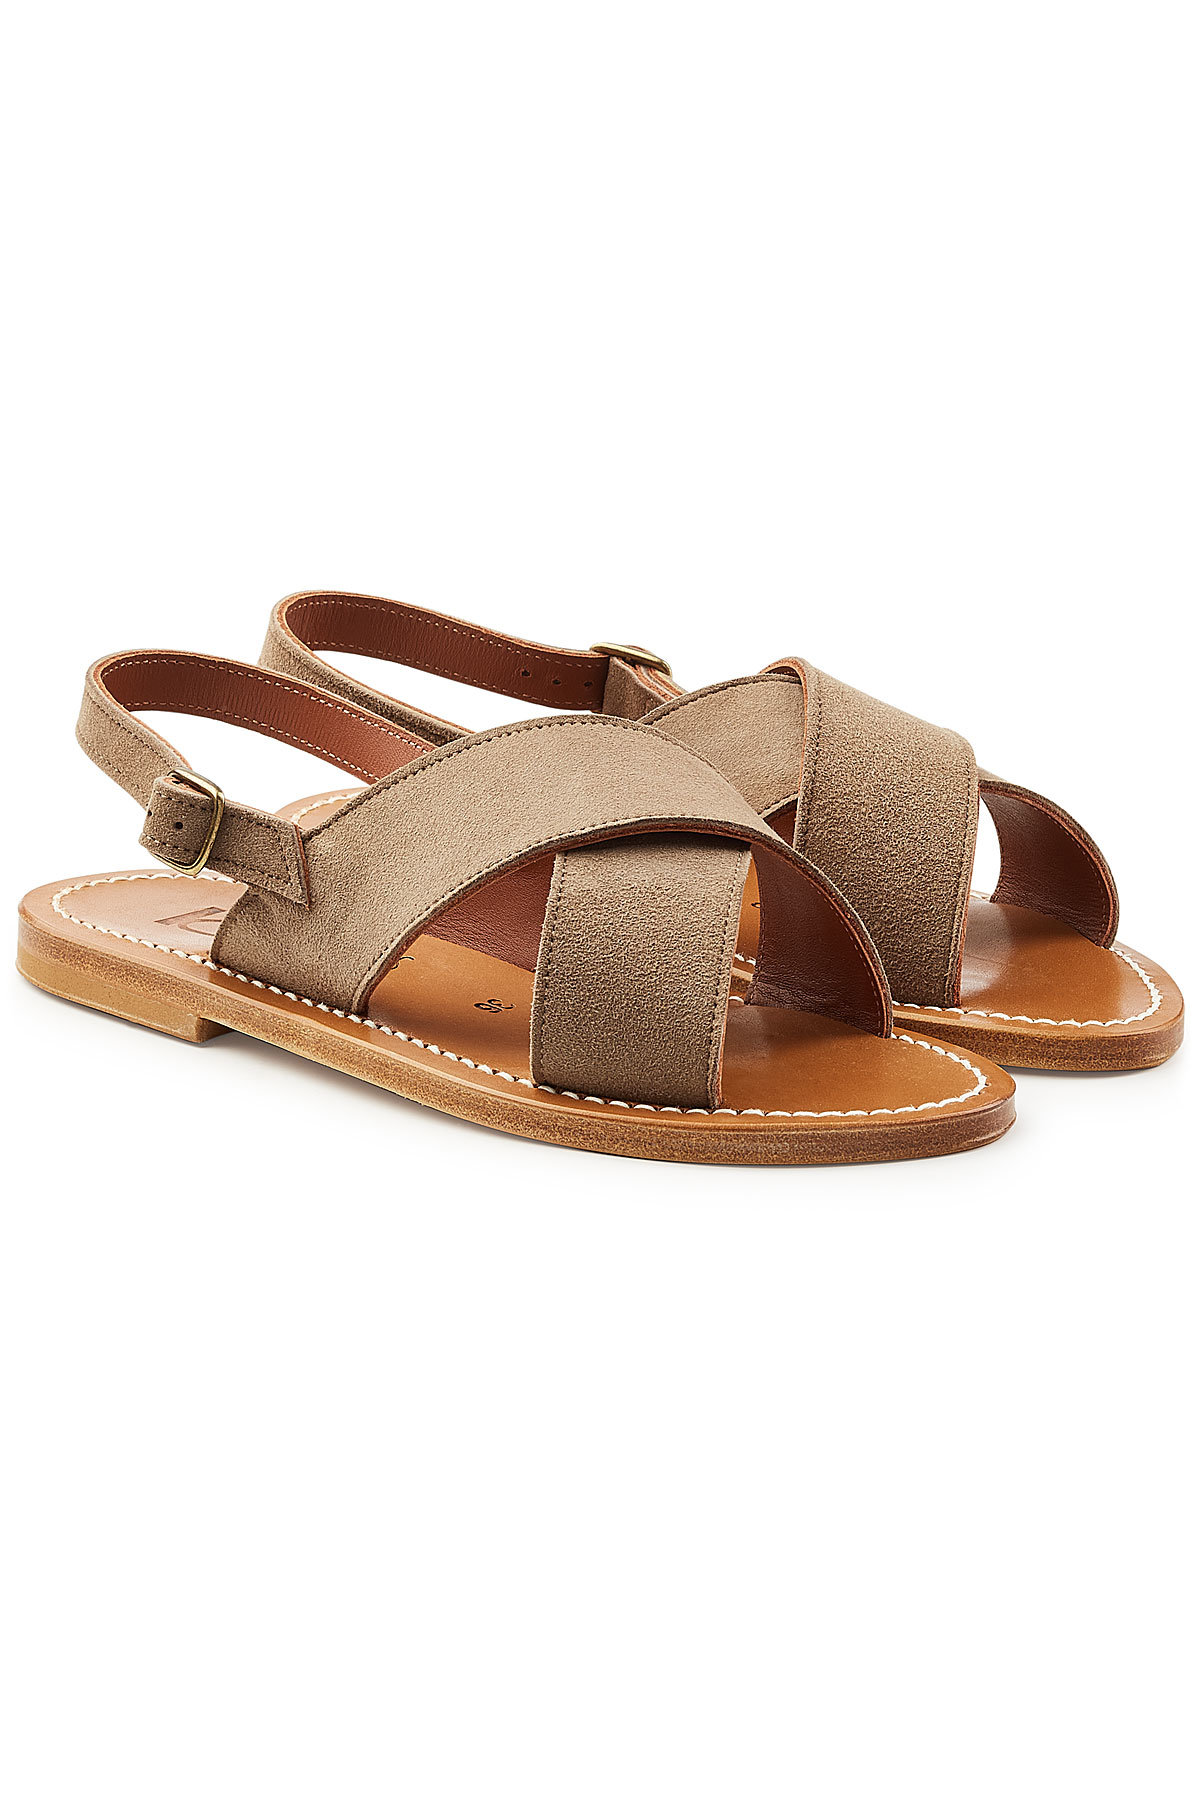 Osorno Suede Sandals by K.Jacques